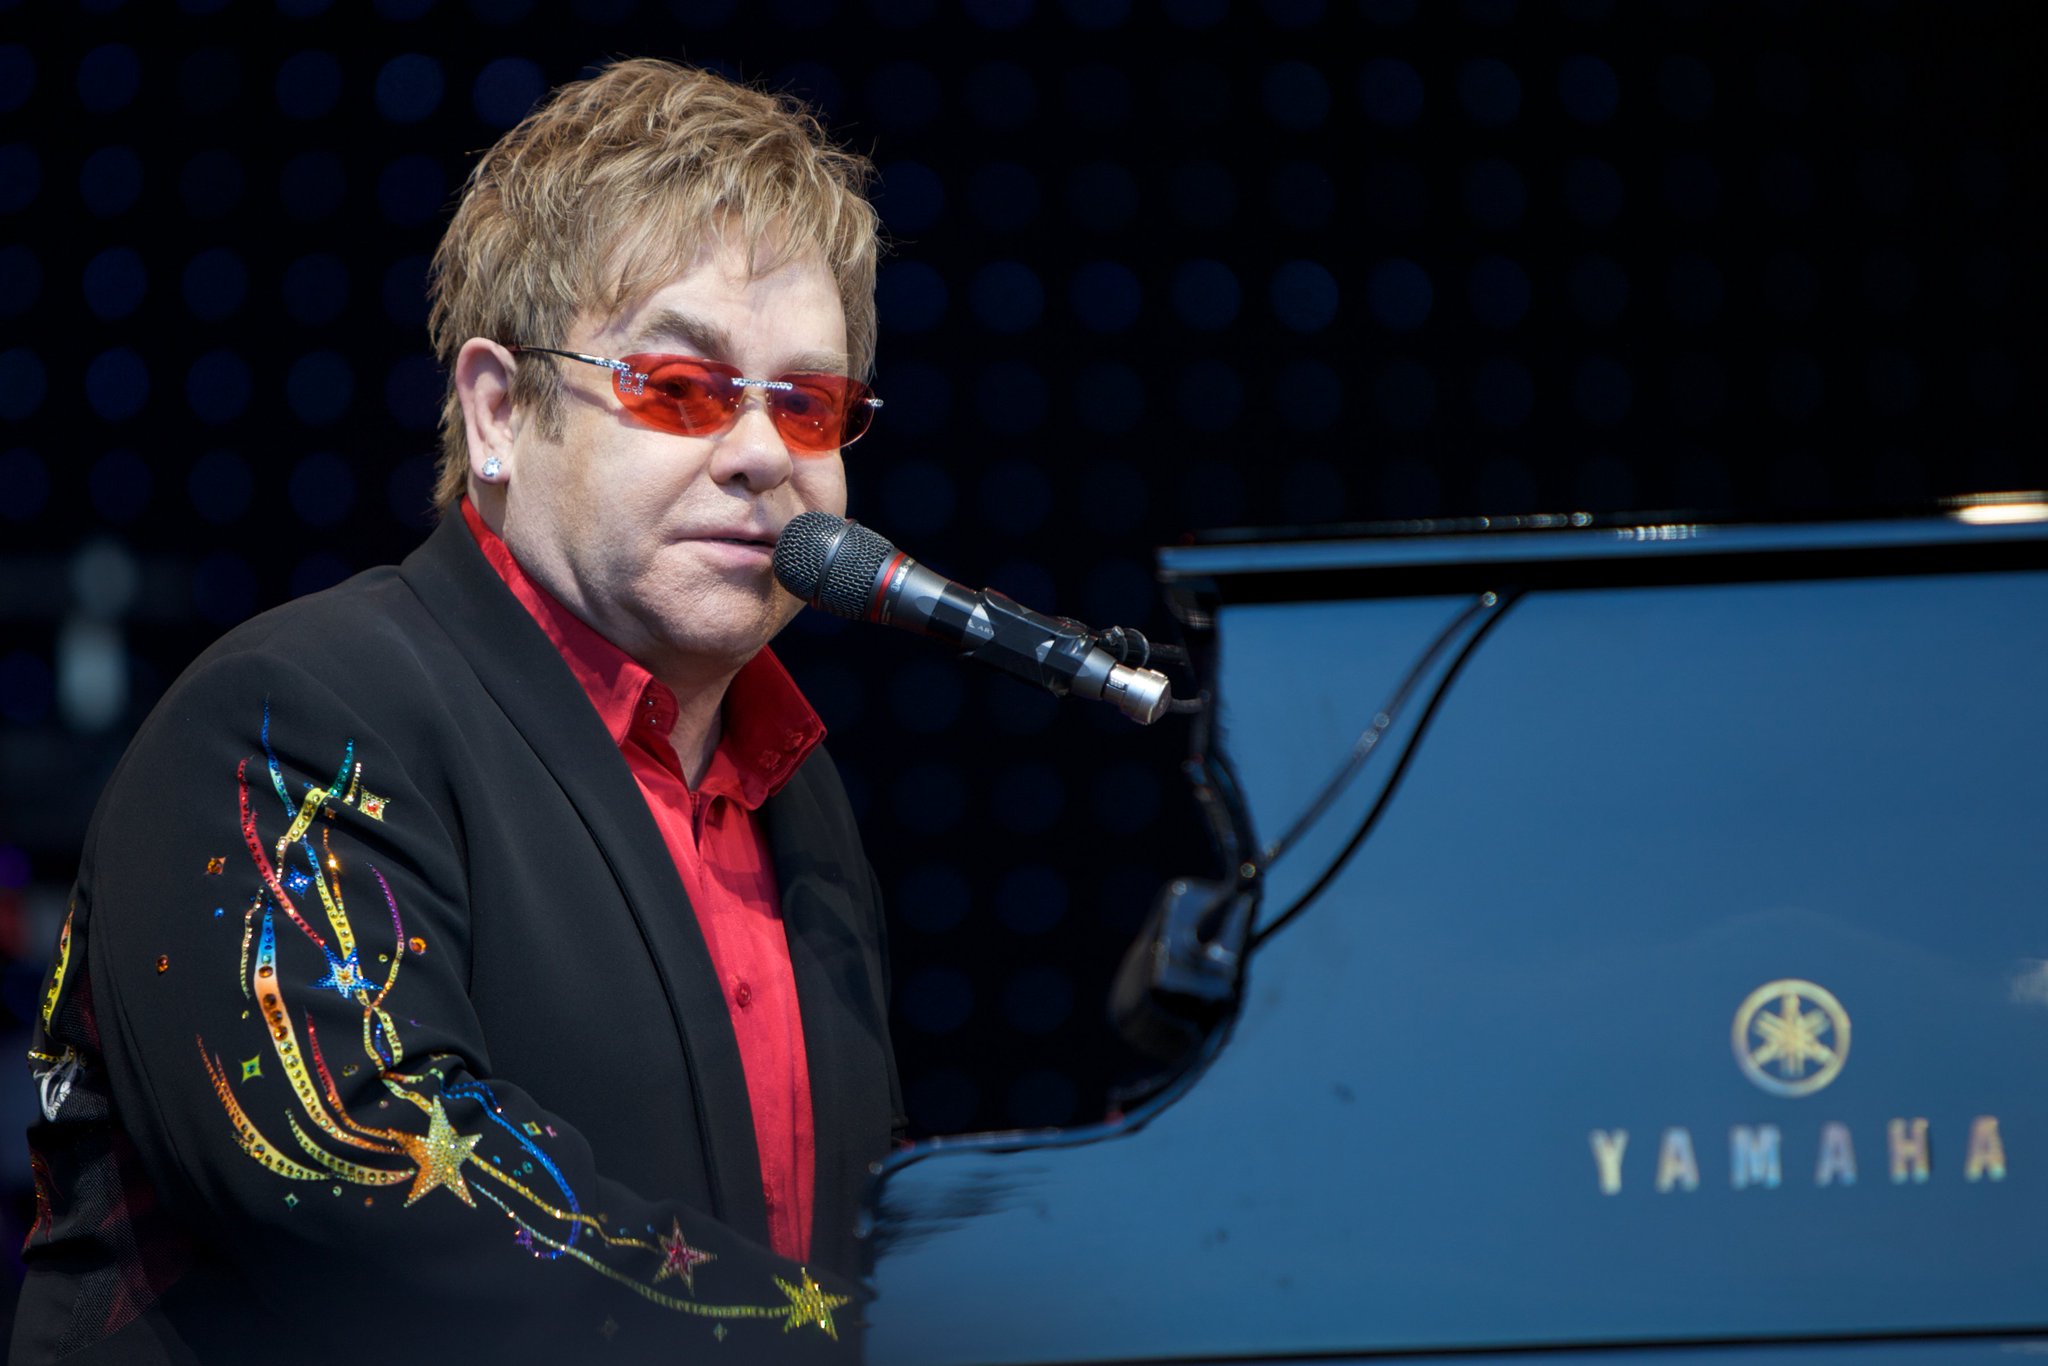 Sending out a big Happy Birthday to Elton John who turns 70 today! 